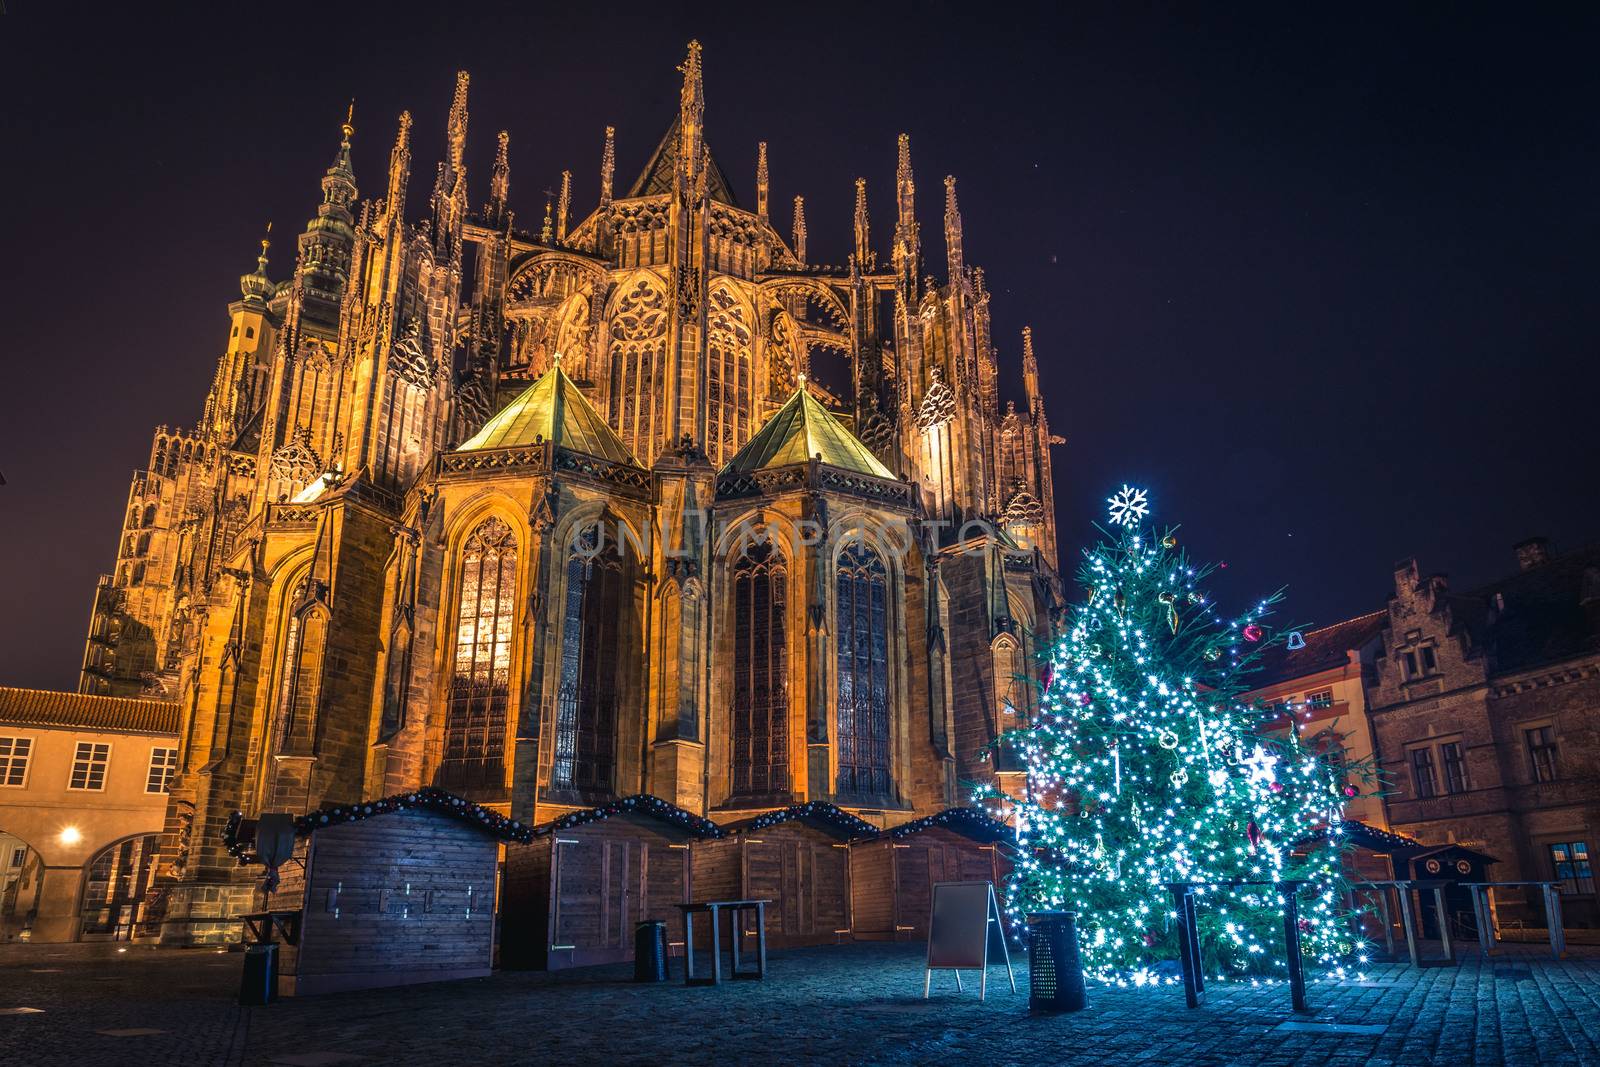 Beautiful chritstmas view of the St. Vitus cathedral. Prague Castle area. by petrsvoboda91